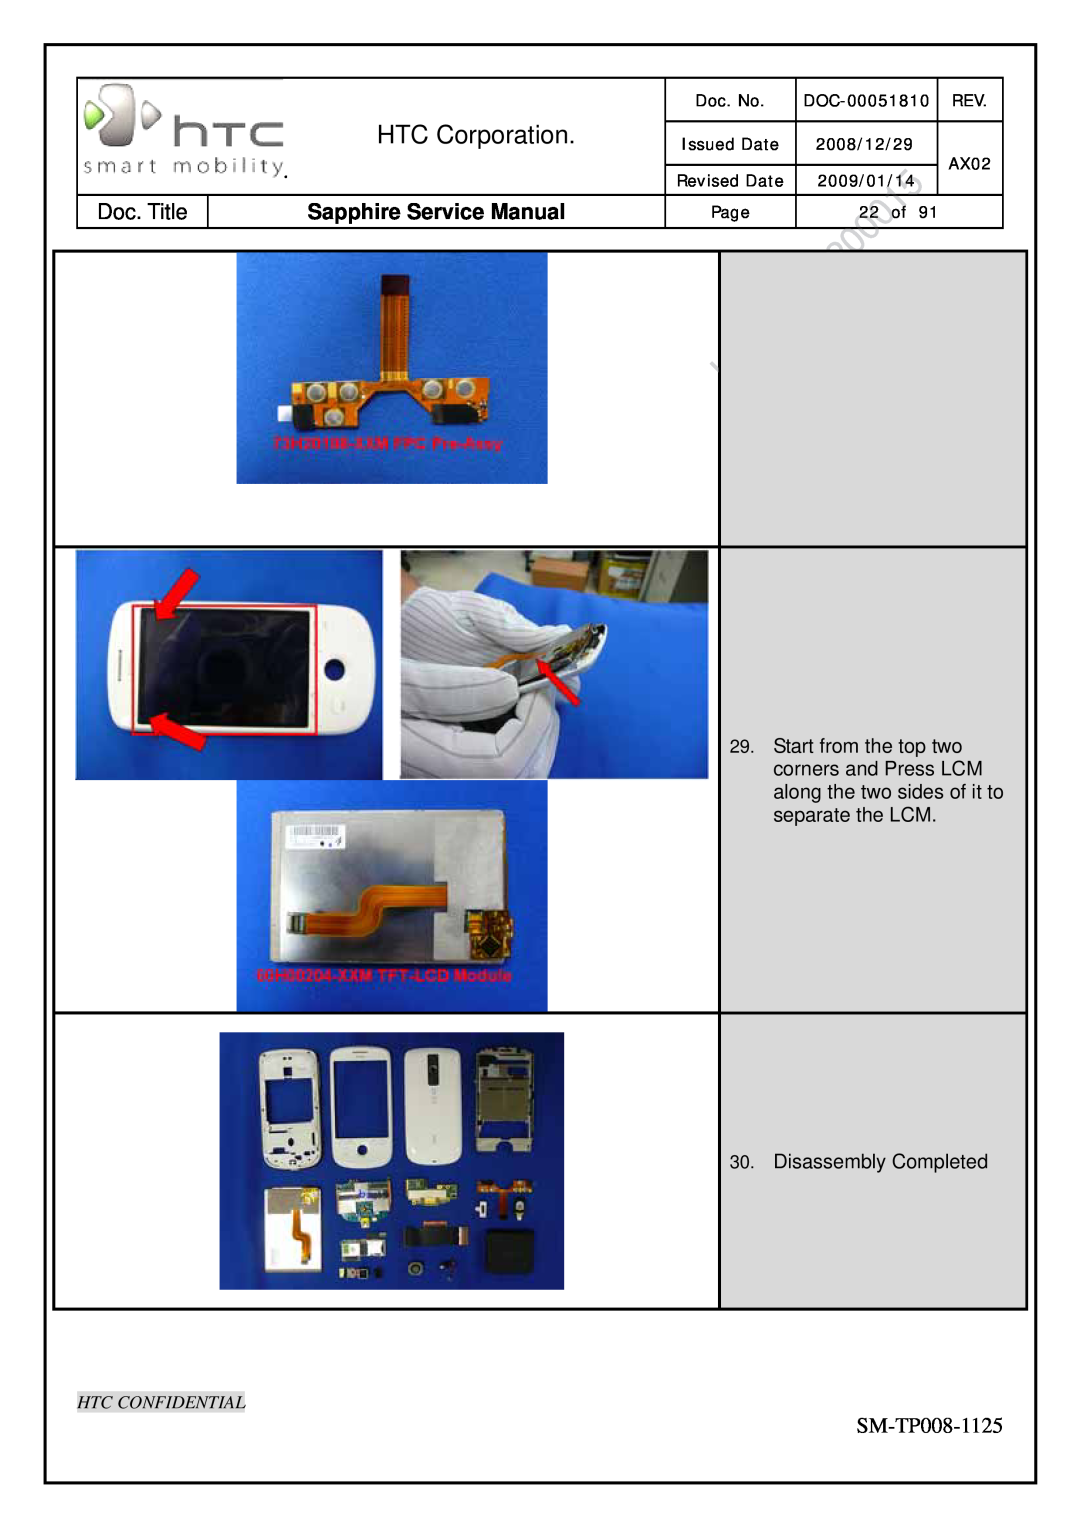 HTC SM-TP008-1125 HTC Corporation, Sapphire Service Manual, Disassembly Completed, Htc Confidential, Doc. No, DOC-00051810 